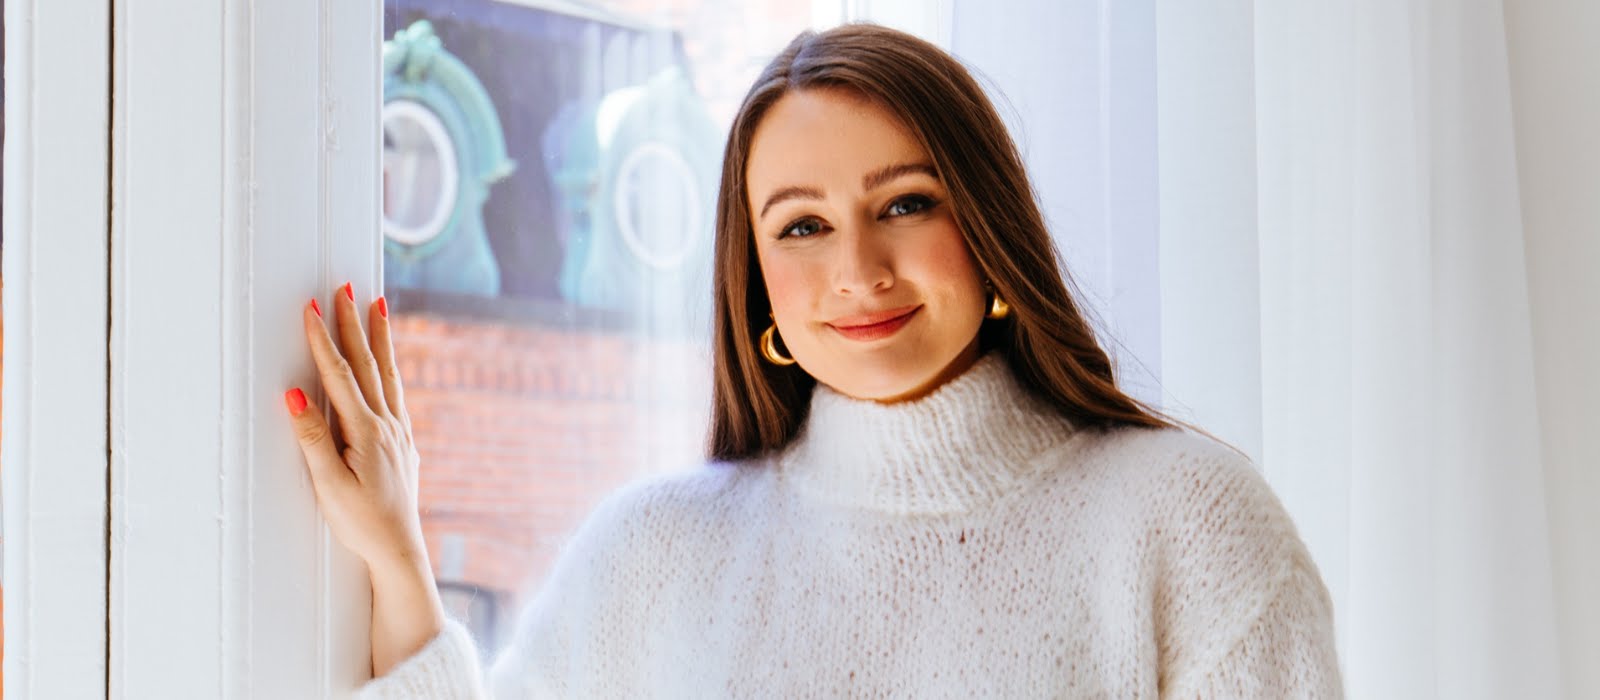 Meet Ashley McDonnell, tech and luxury entrepreneur and podcaster